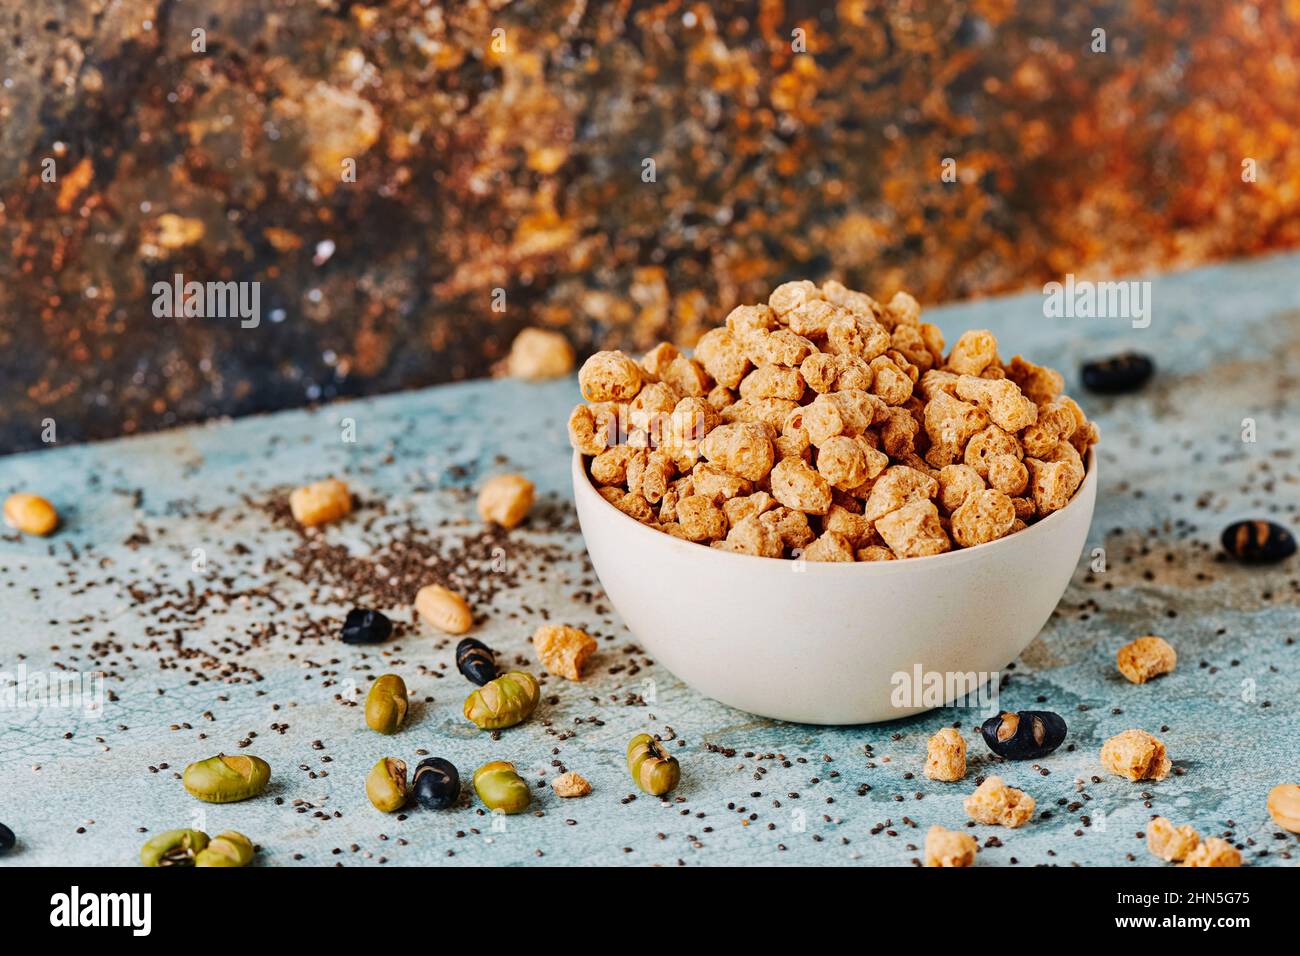 a bowl with some chunks of textured soy protein on a blue rustic wooden table Stock Photo